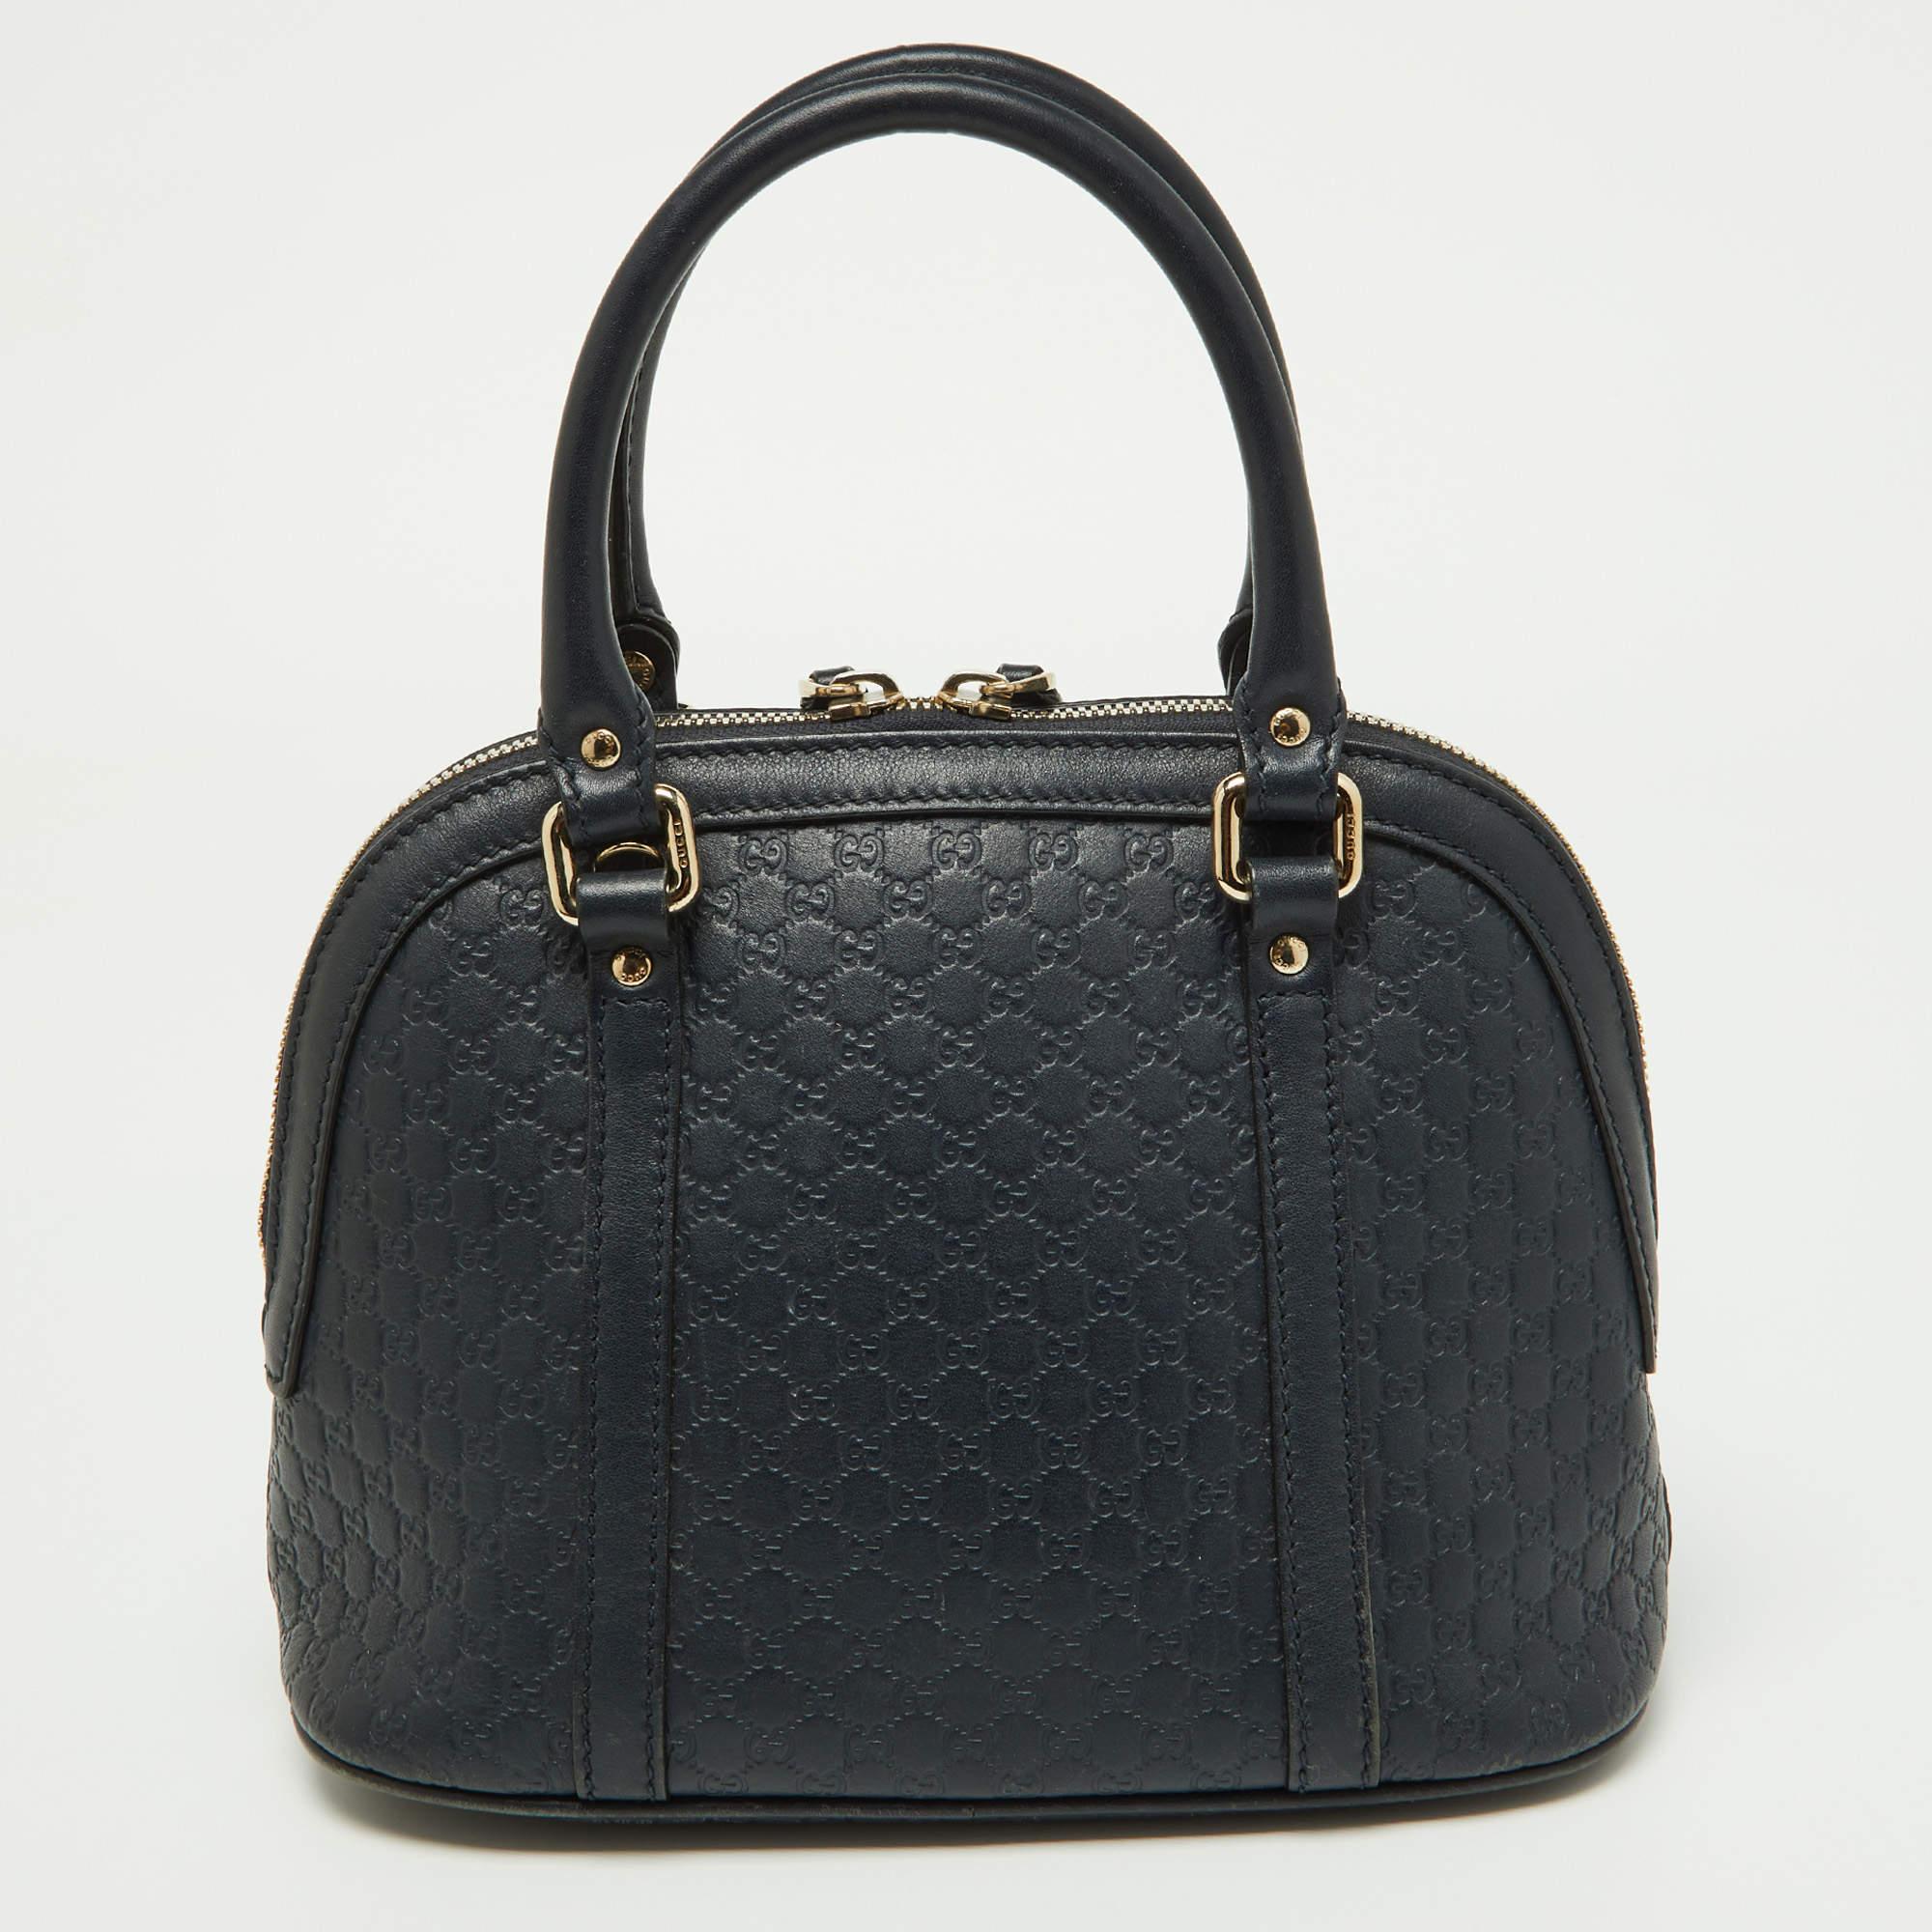 Indulge in luxury with this Gucci blue bag. Meticulously crafted from premium materials, it combines exquisite design, impeccable craftsmanship, and timeless elegance. Elevate your style with this fashion accessory.

